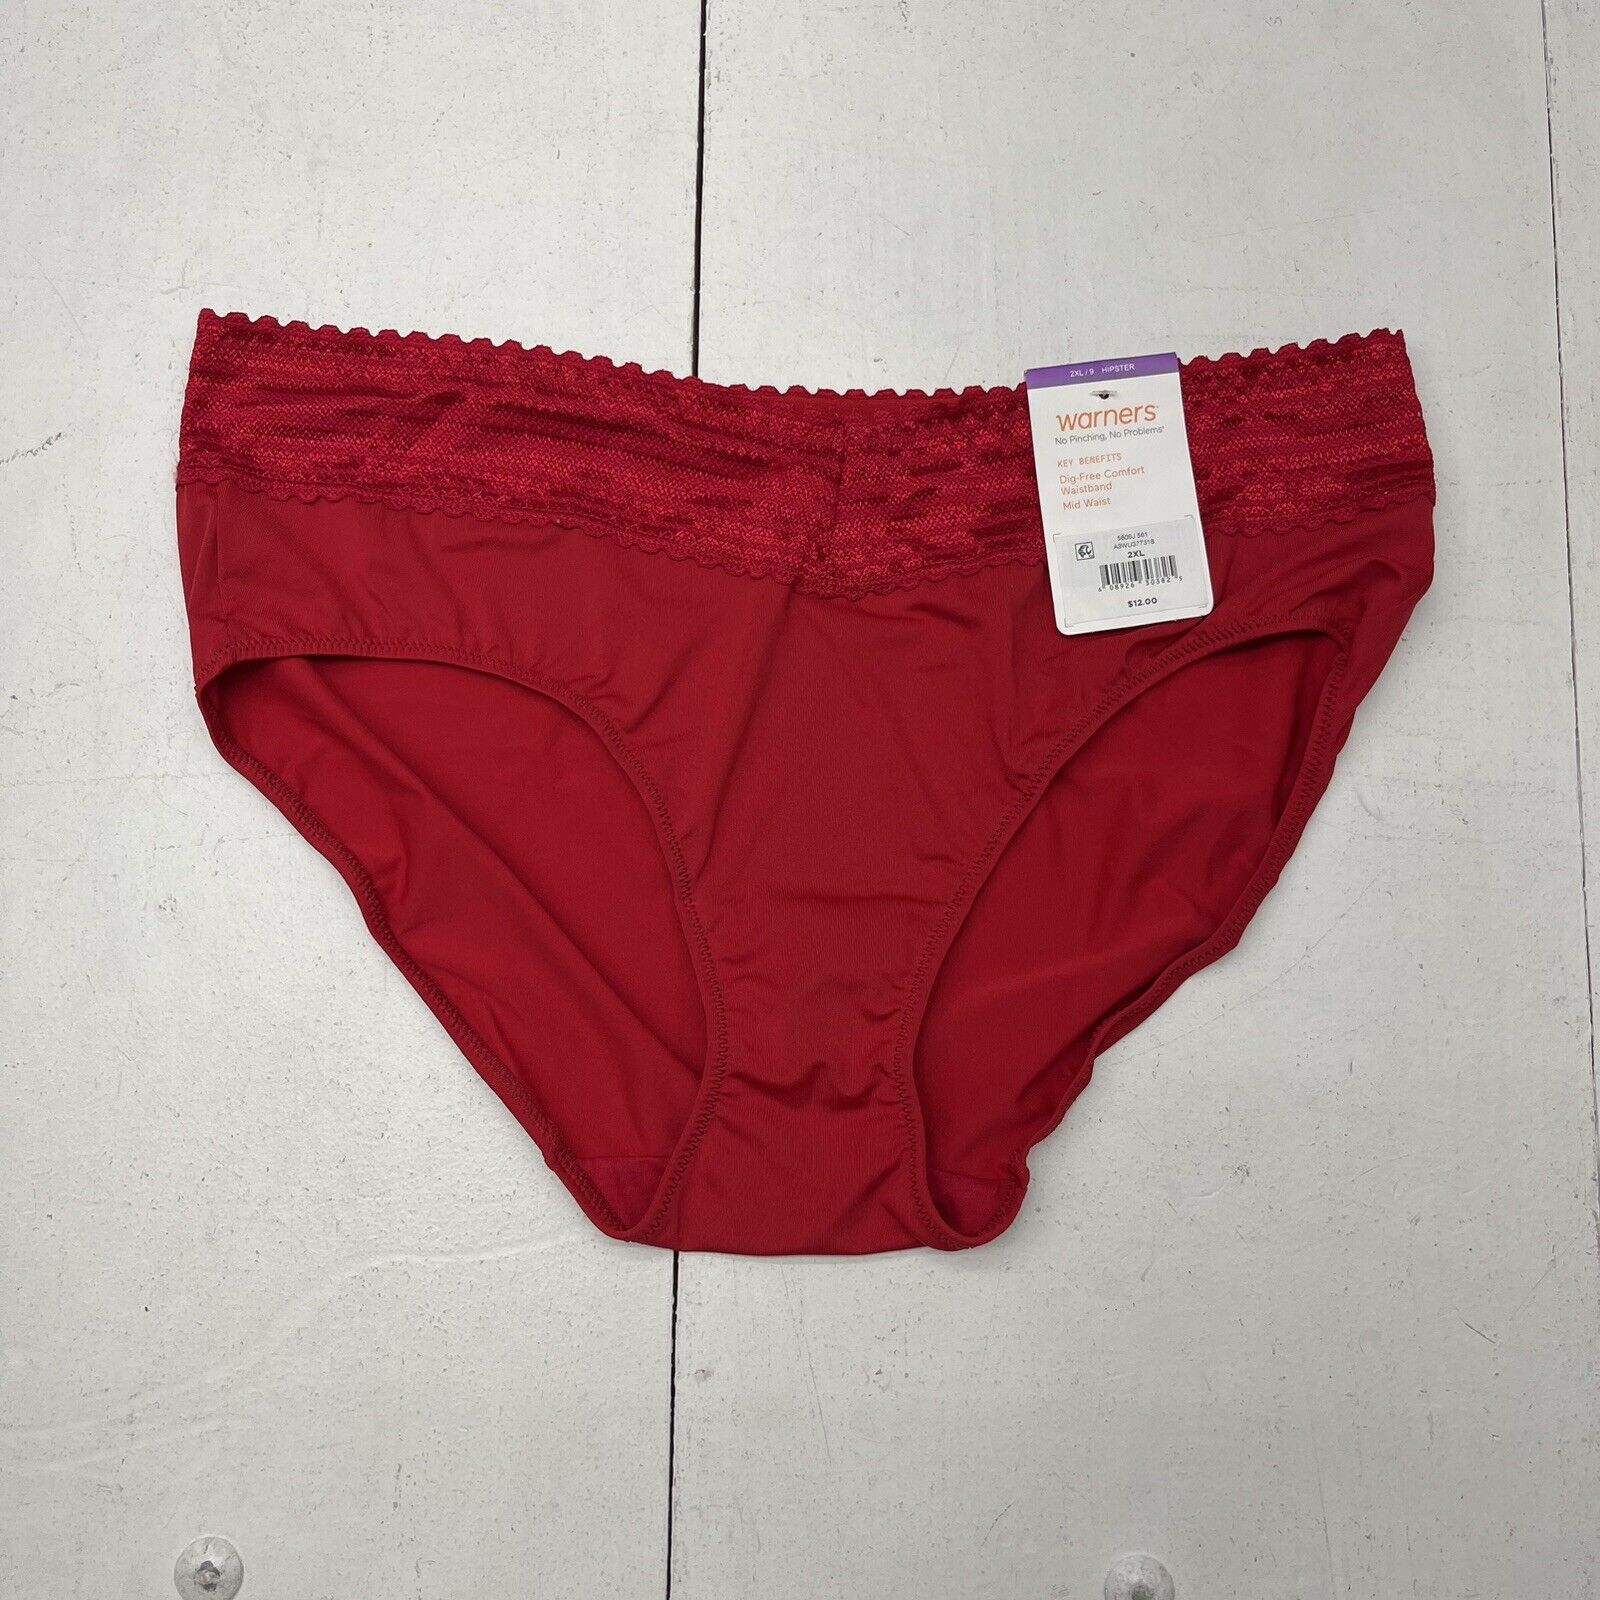 Warners Red Hipster Panties Women's Size 2XL NEW - beyond exchange